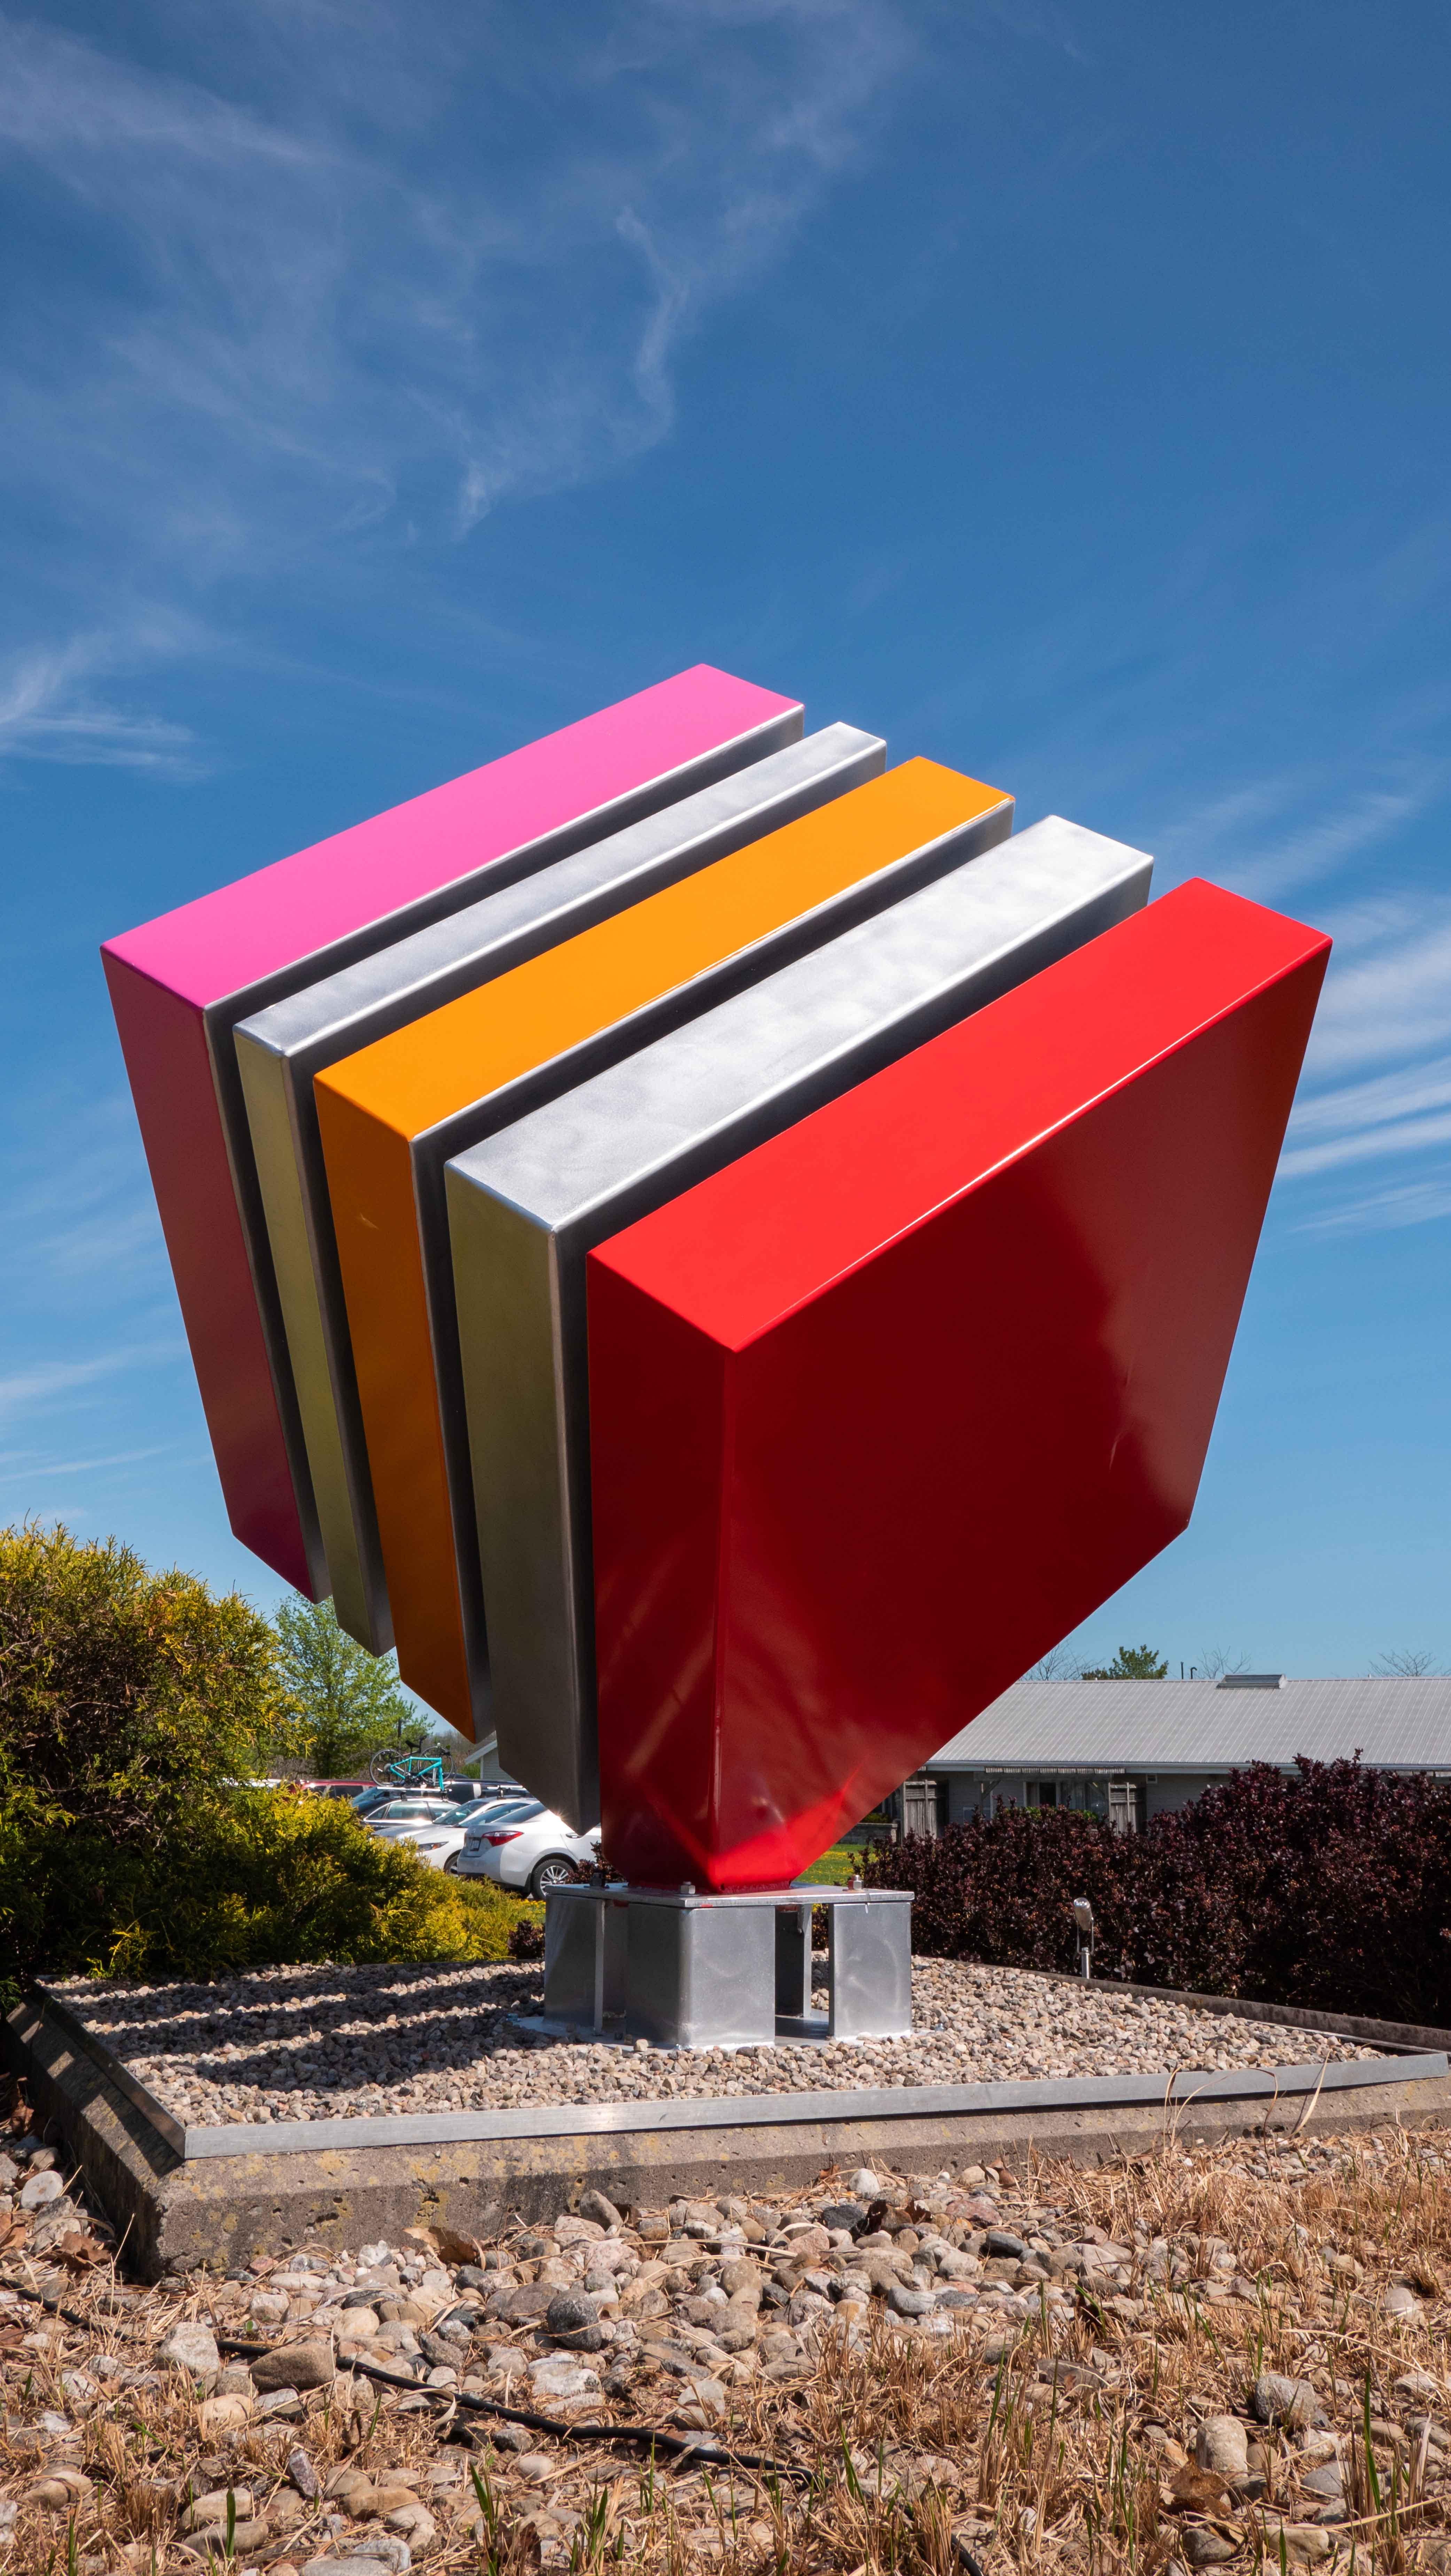 Philippe Pallafray’s latest sculpture—an eye-popping candy-coloured large steel cube—each stripe painted in bright red, orange and pink balances on one corner. The Quebec artist designs pop art pieces that reflect the duality of nature and the